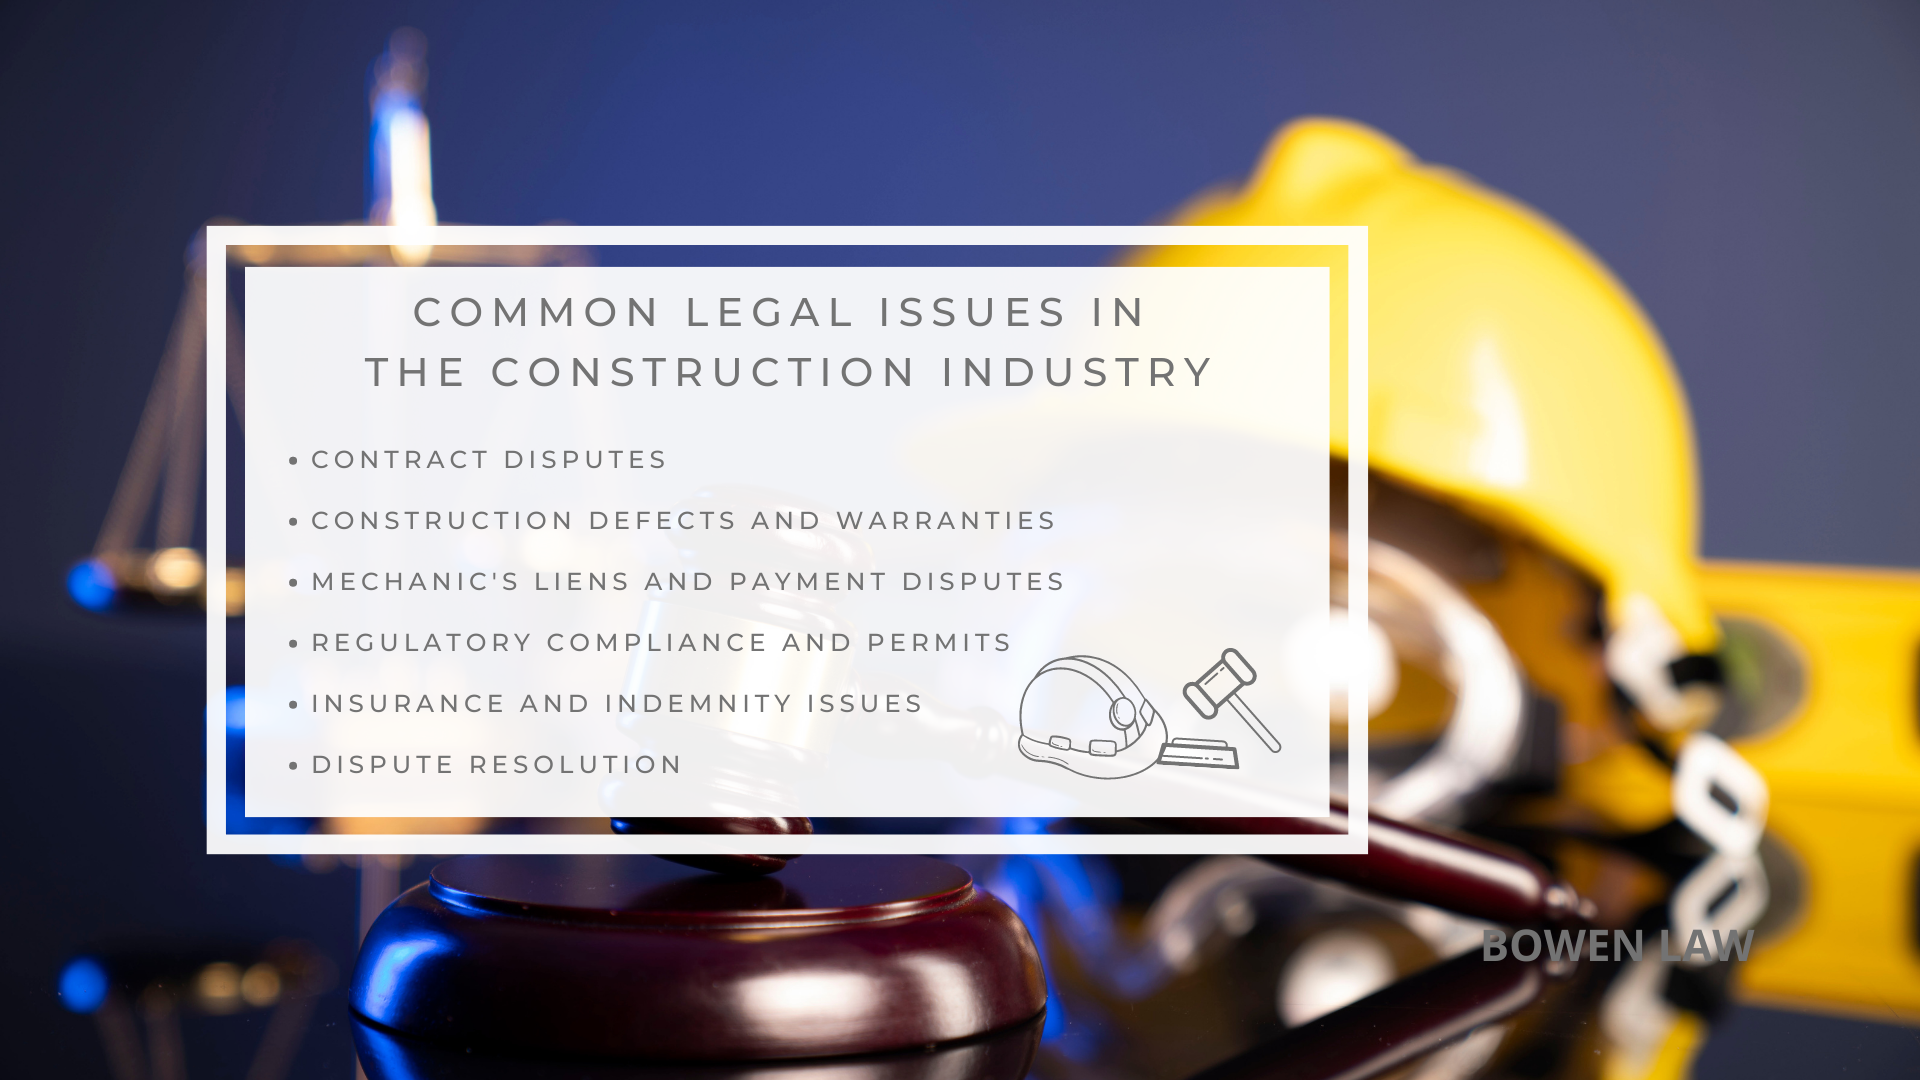 Infographic image of common legal issues in the construction industry